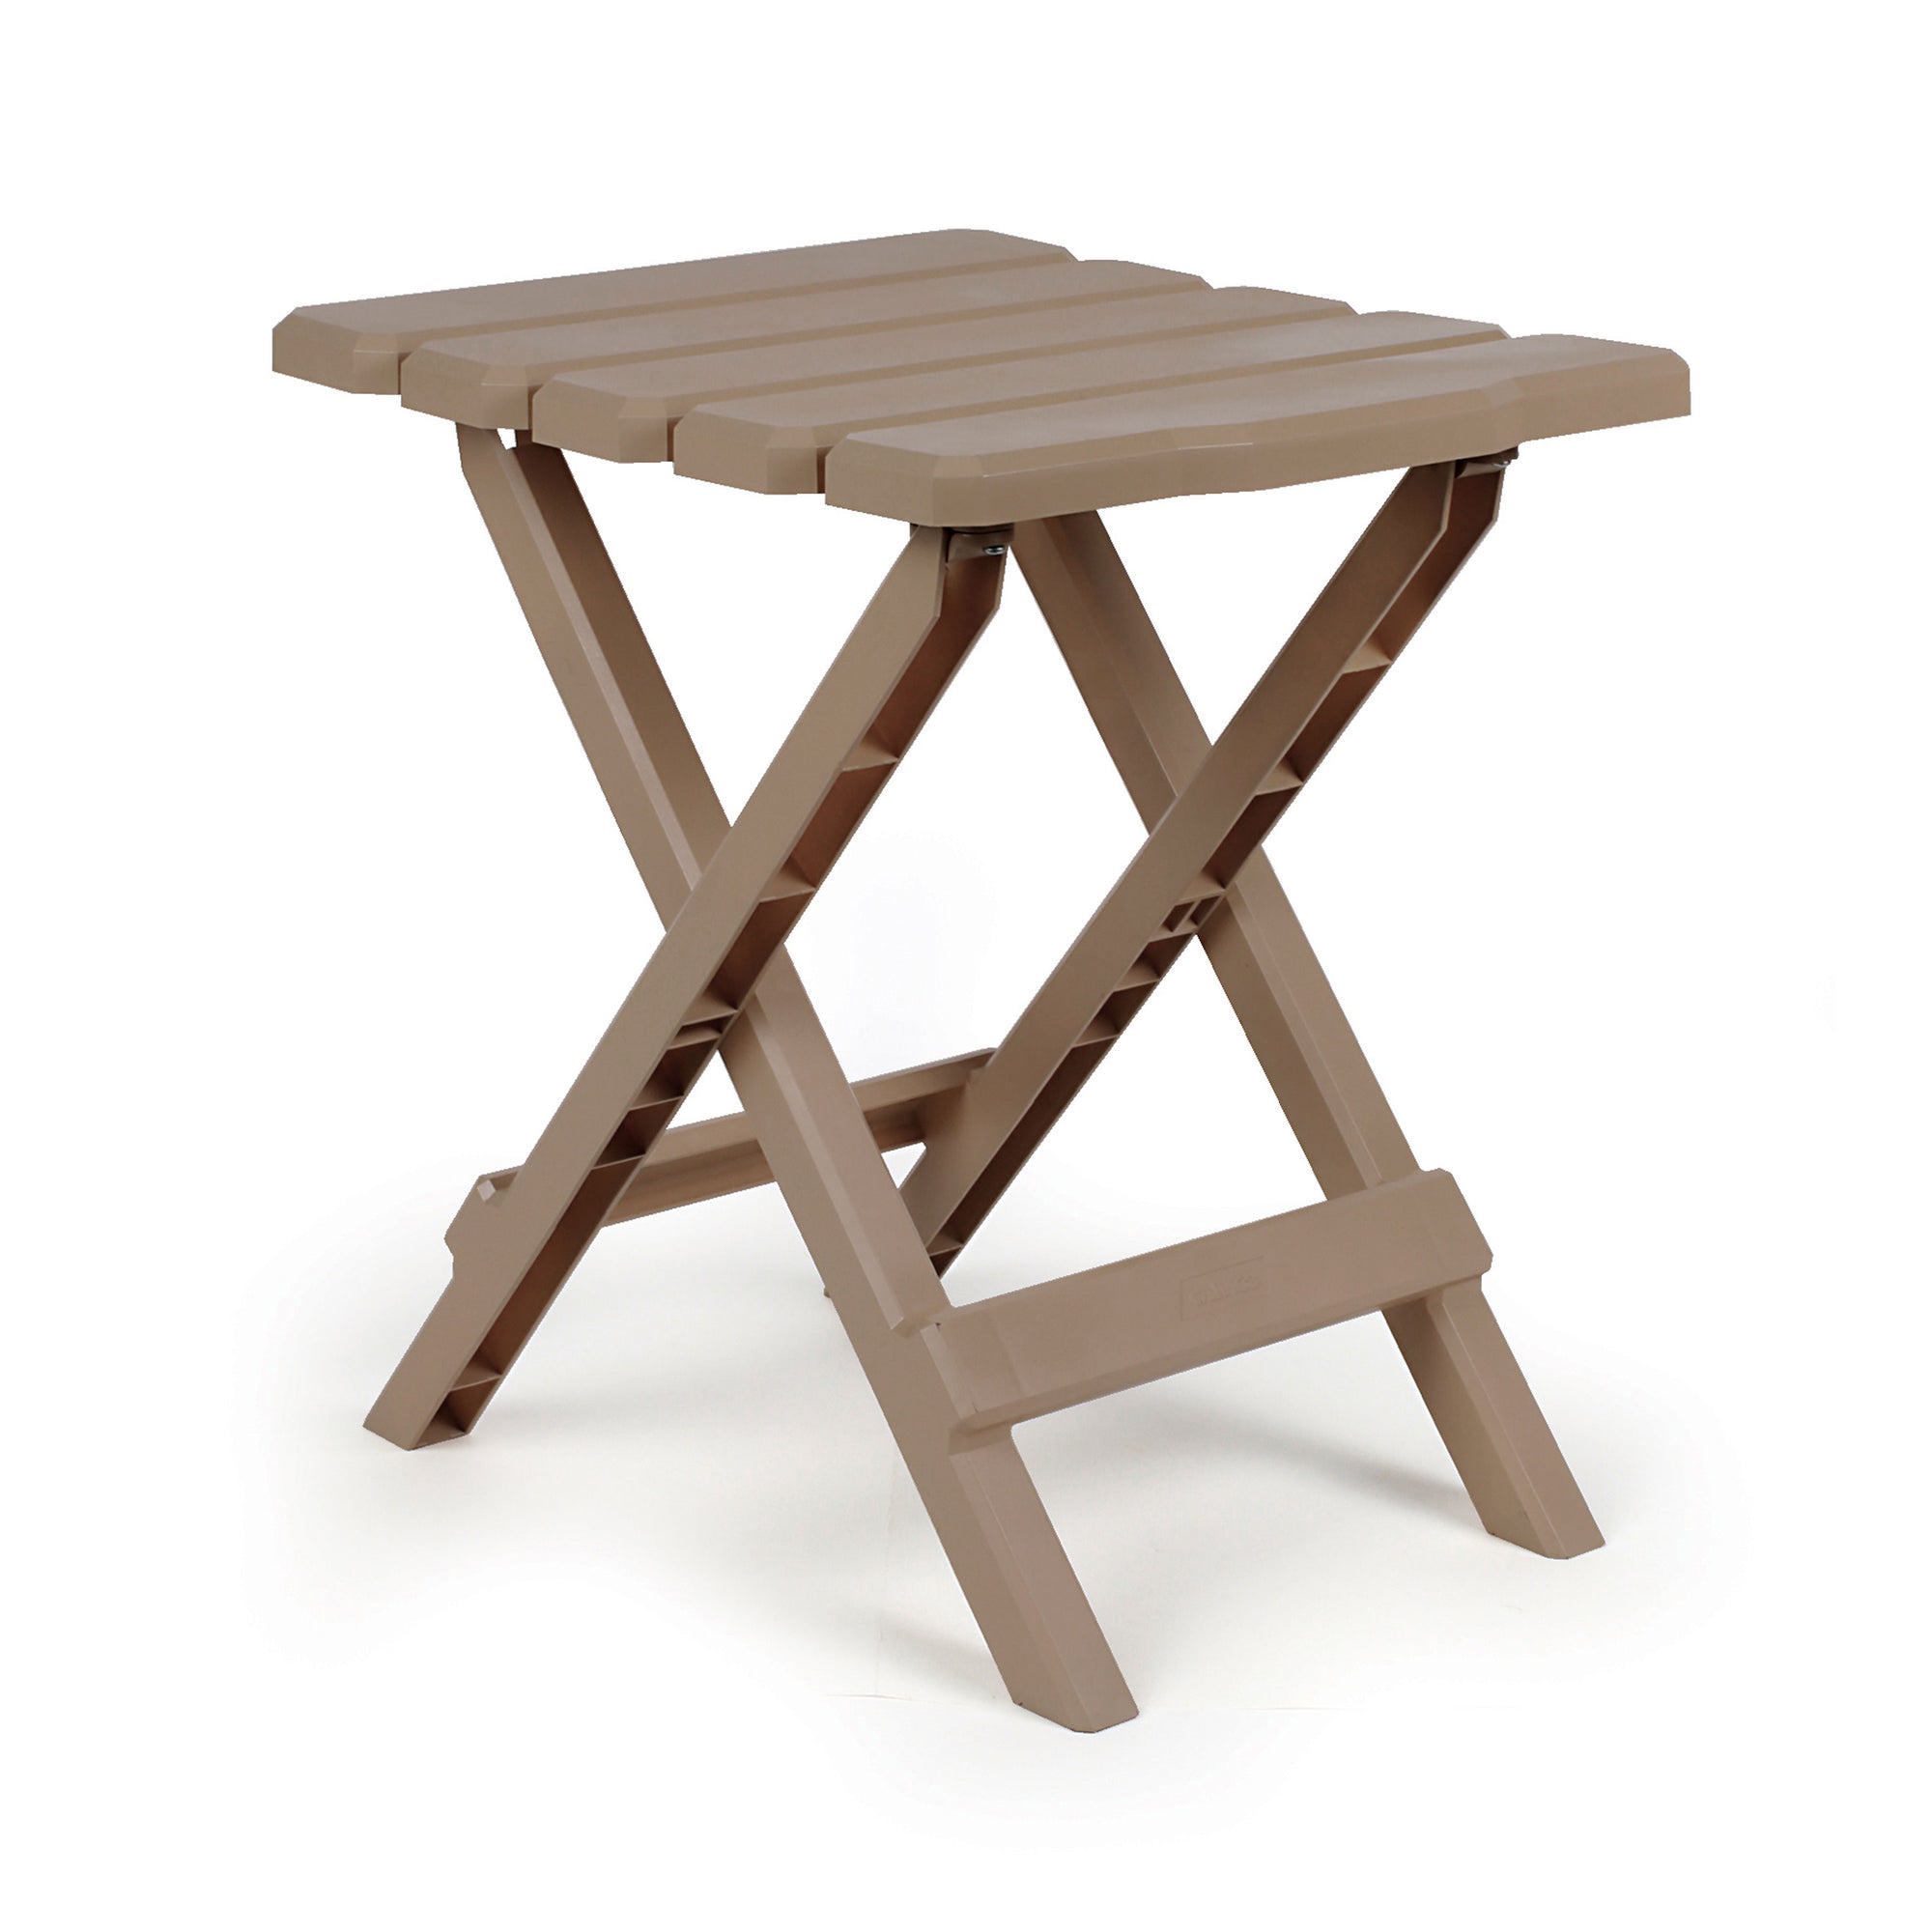 Camco 51883 Small Adirondack Folding Table - Champagne